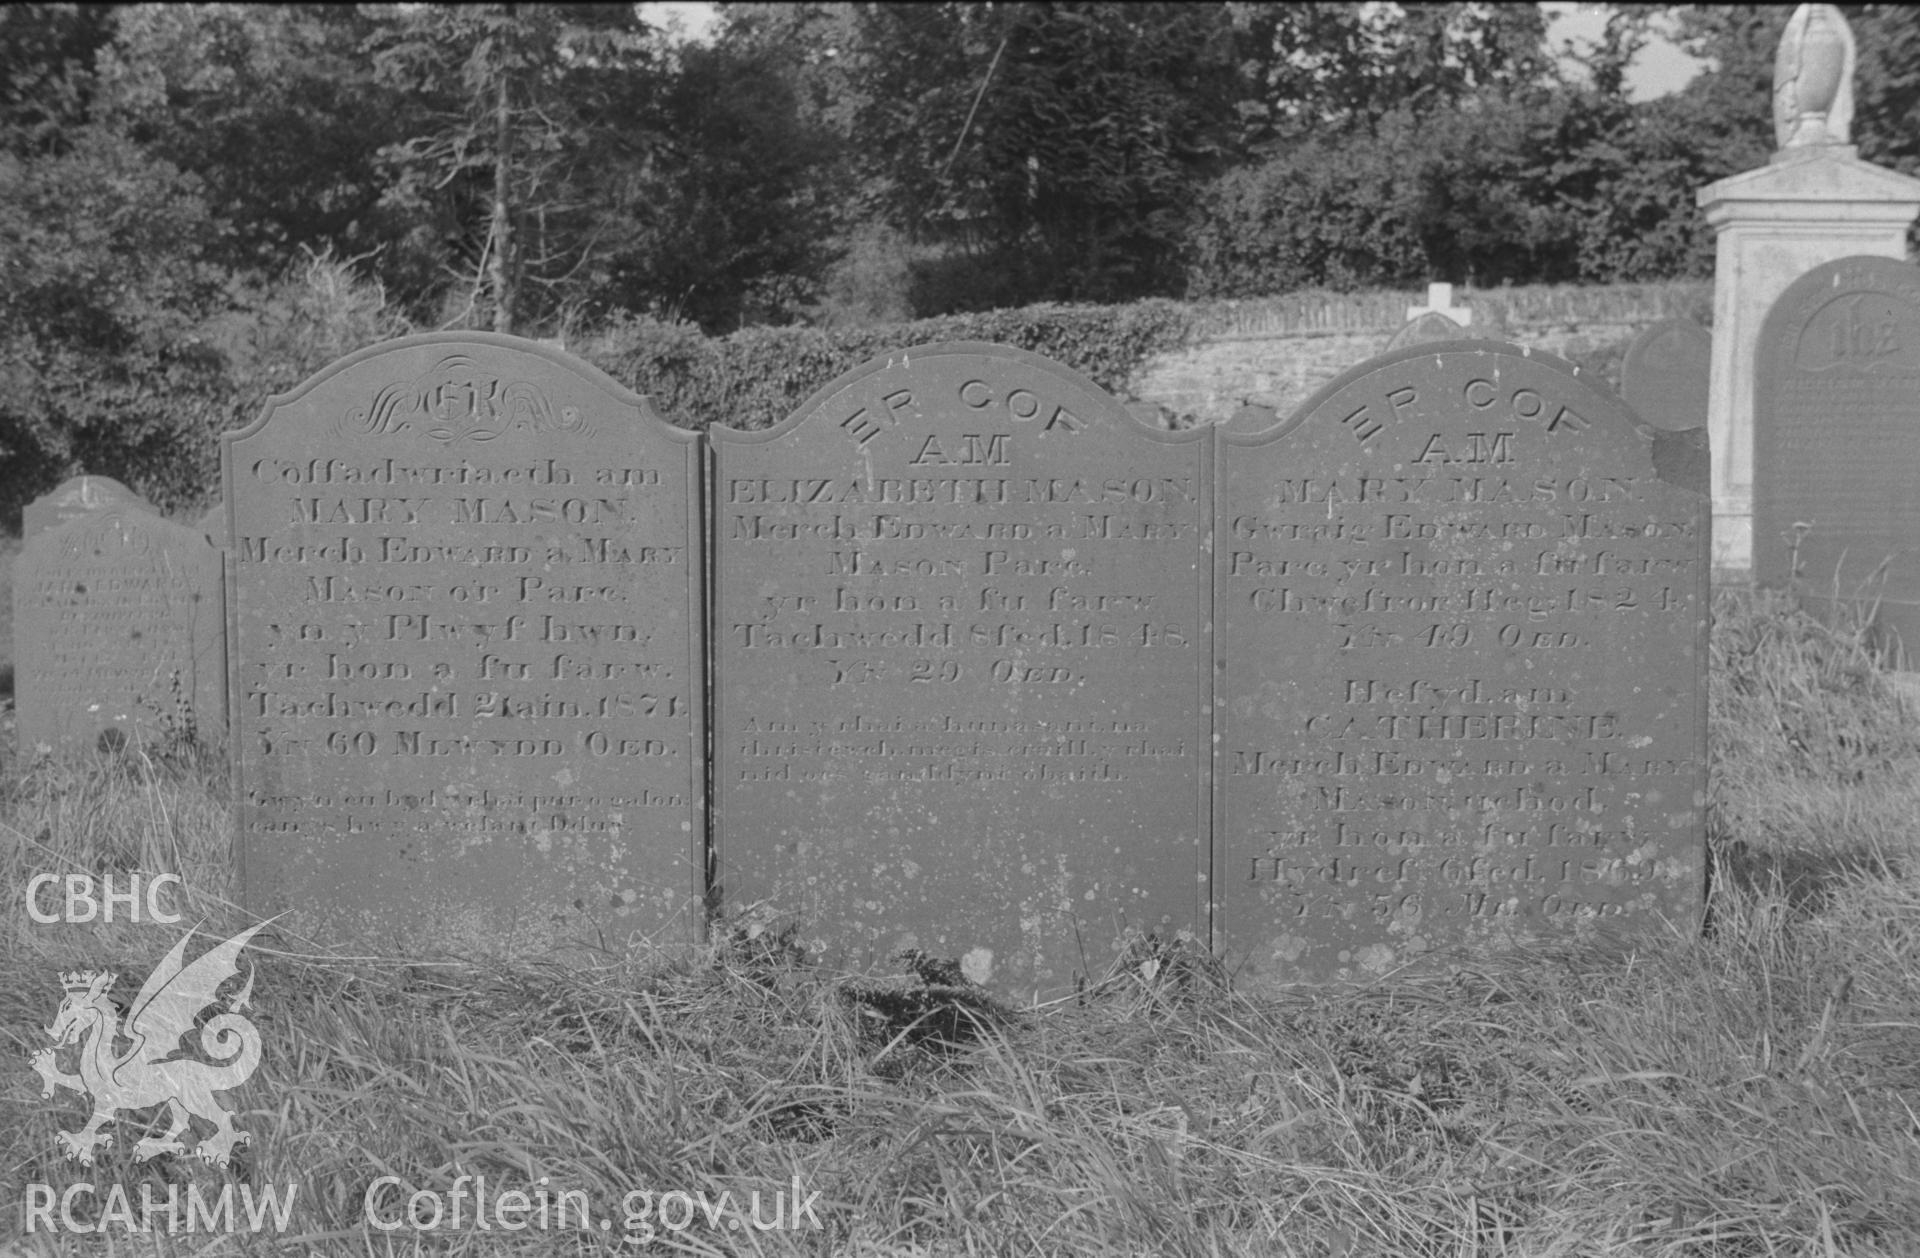 Digital copy of a black and white negative showing gravestones in memory of members of the Mason family at St. Non's Church, Llanerchaeron. Photographed by Arthur O. Chater in September 1966.